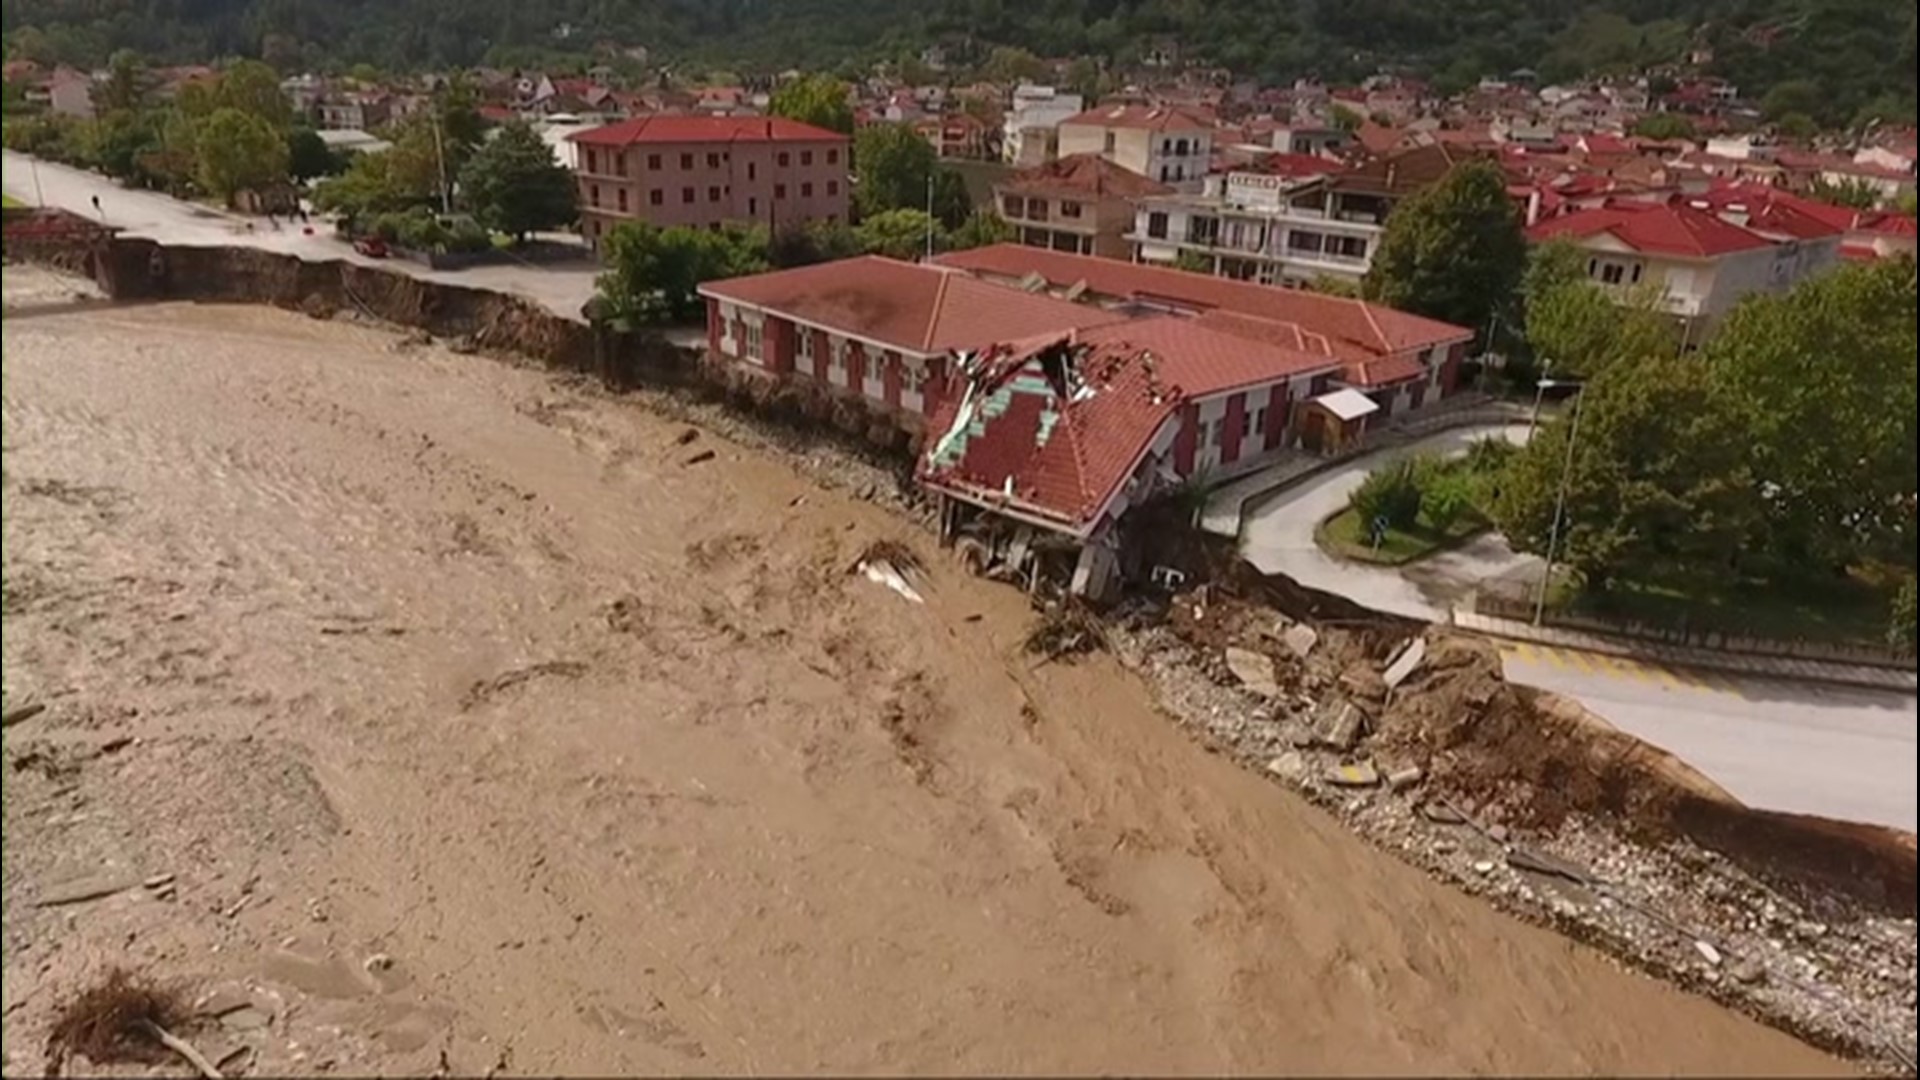 Drone footage captured in Mouzaki, Greece, on Sept. 19, shows the destruction caused to a building and road after flash flooding swept through the area, forcing them to collapse.